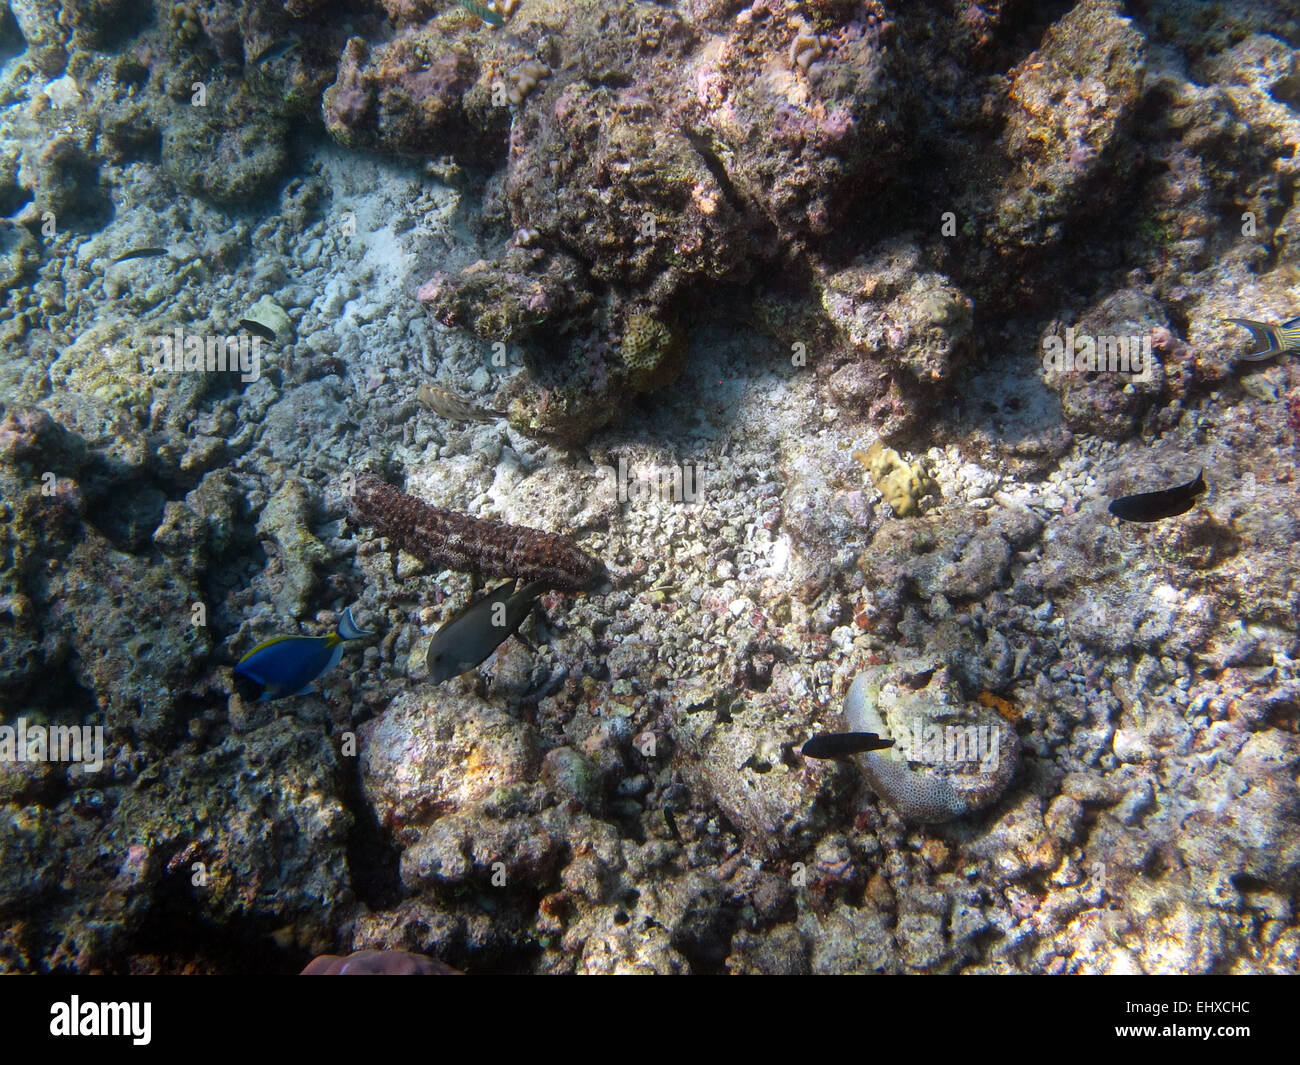 Sea cucumber, a Powder-blue Surgeonfish and Bristletooth Surgeonfish on a coral reef in the Maldives Stock Photo